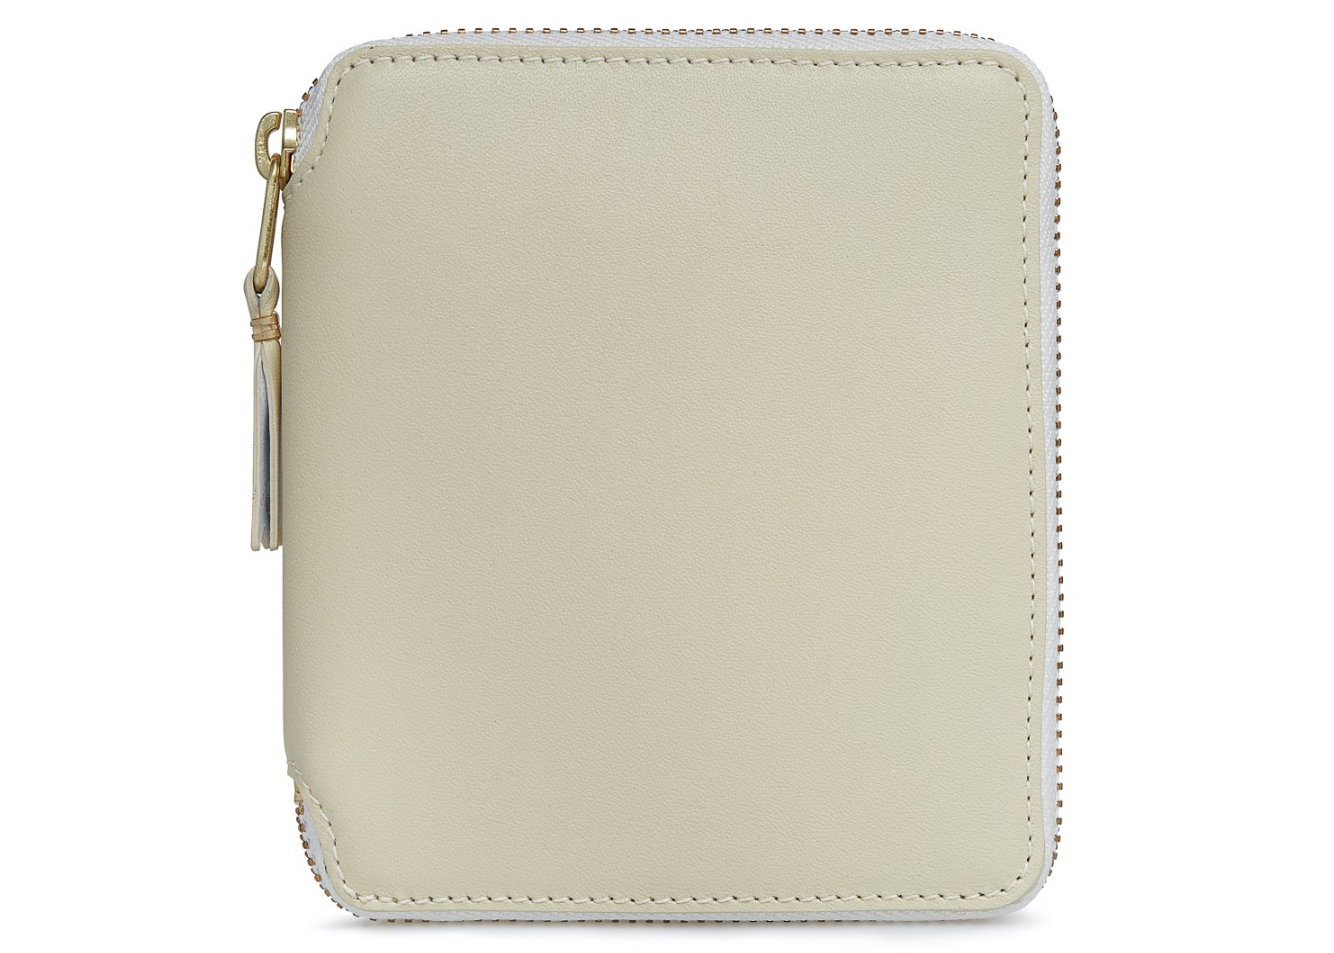 Comme des Garcons SA2100 Classic Plain Wallet Off-White in Leather